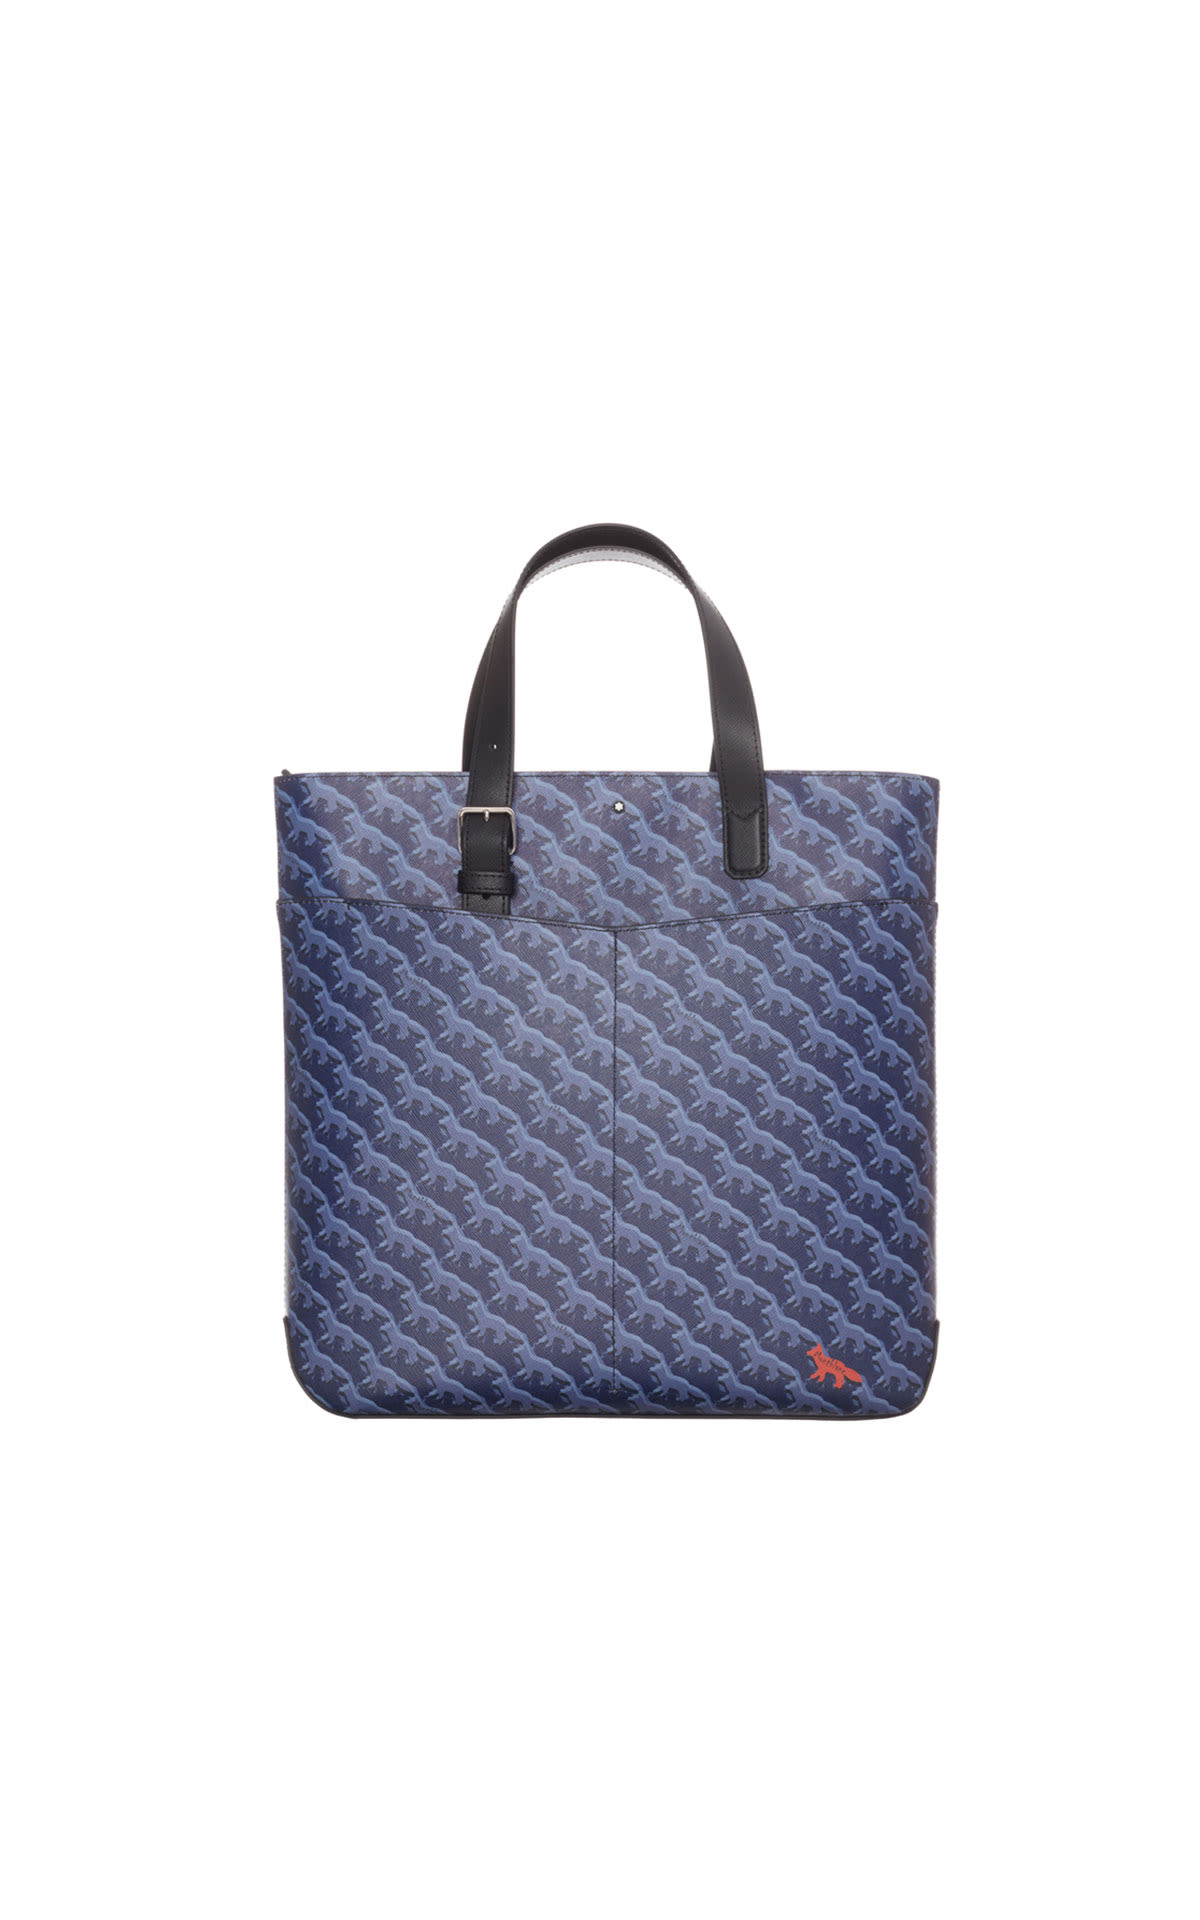 Montblanc Sartorial vertical tote X kitsume from Bicester Village